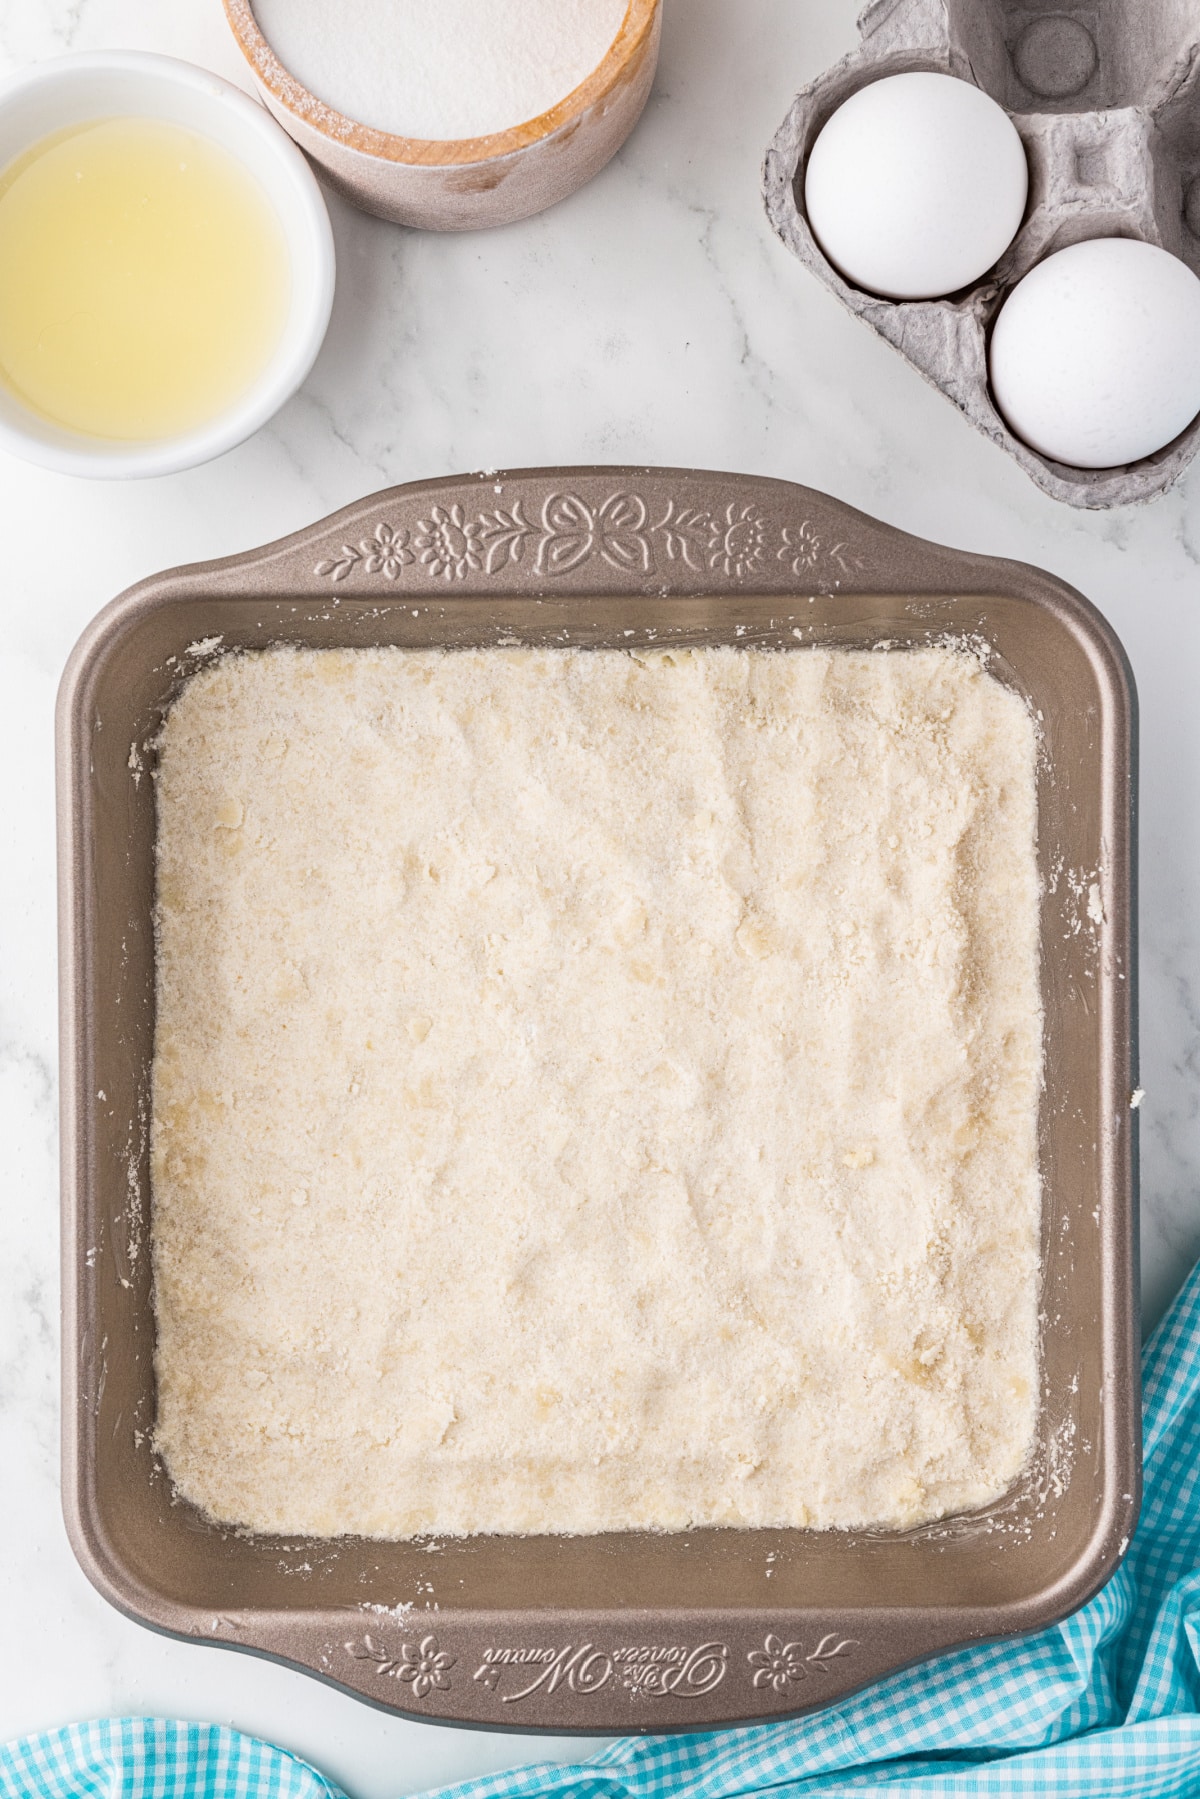 dry ingredients pressed into the bottom of a square baking pan to make lemon bar crust